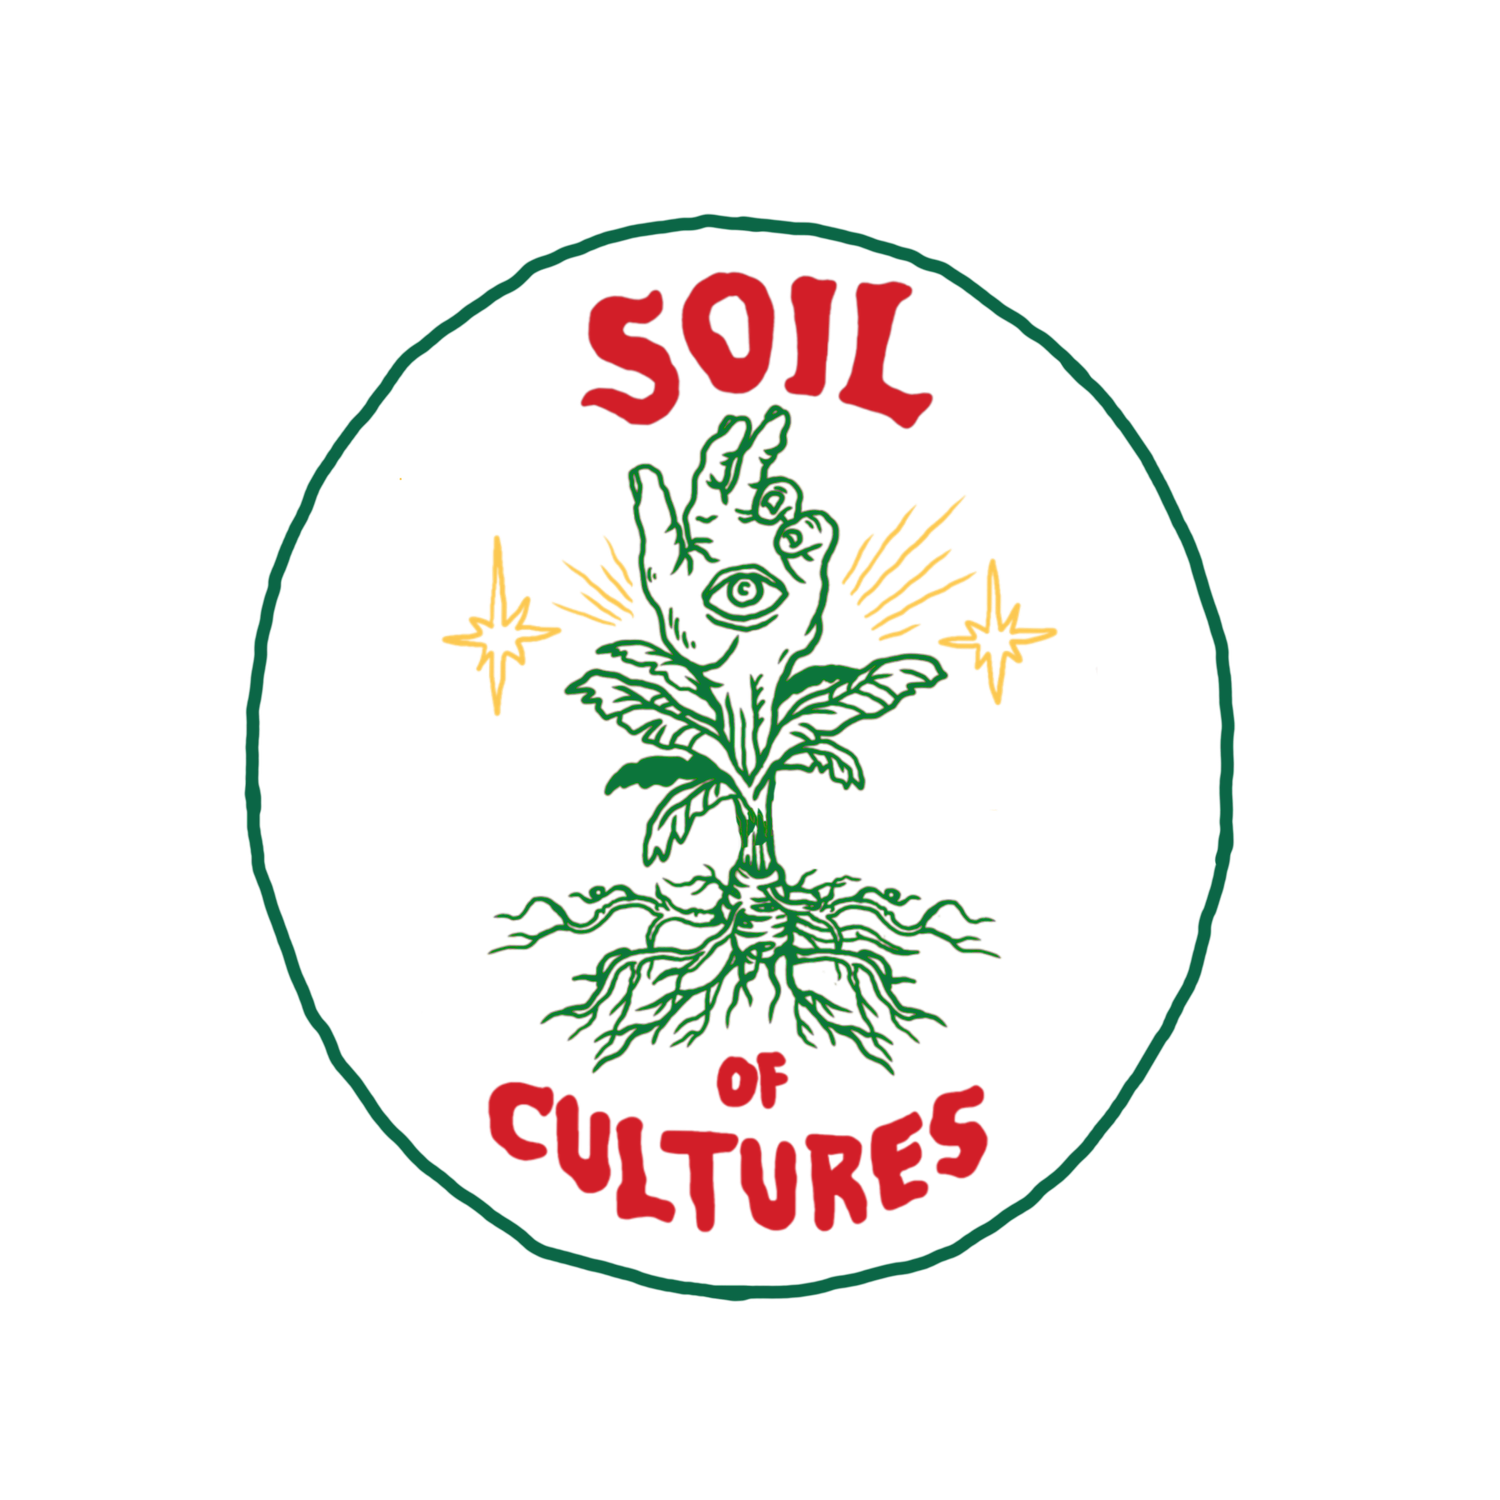 Soil of Cultures